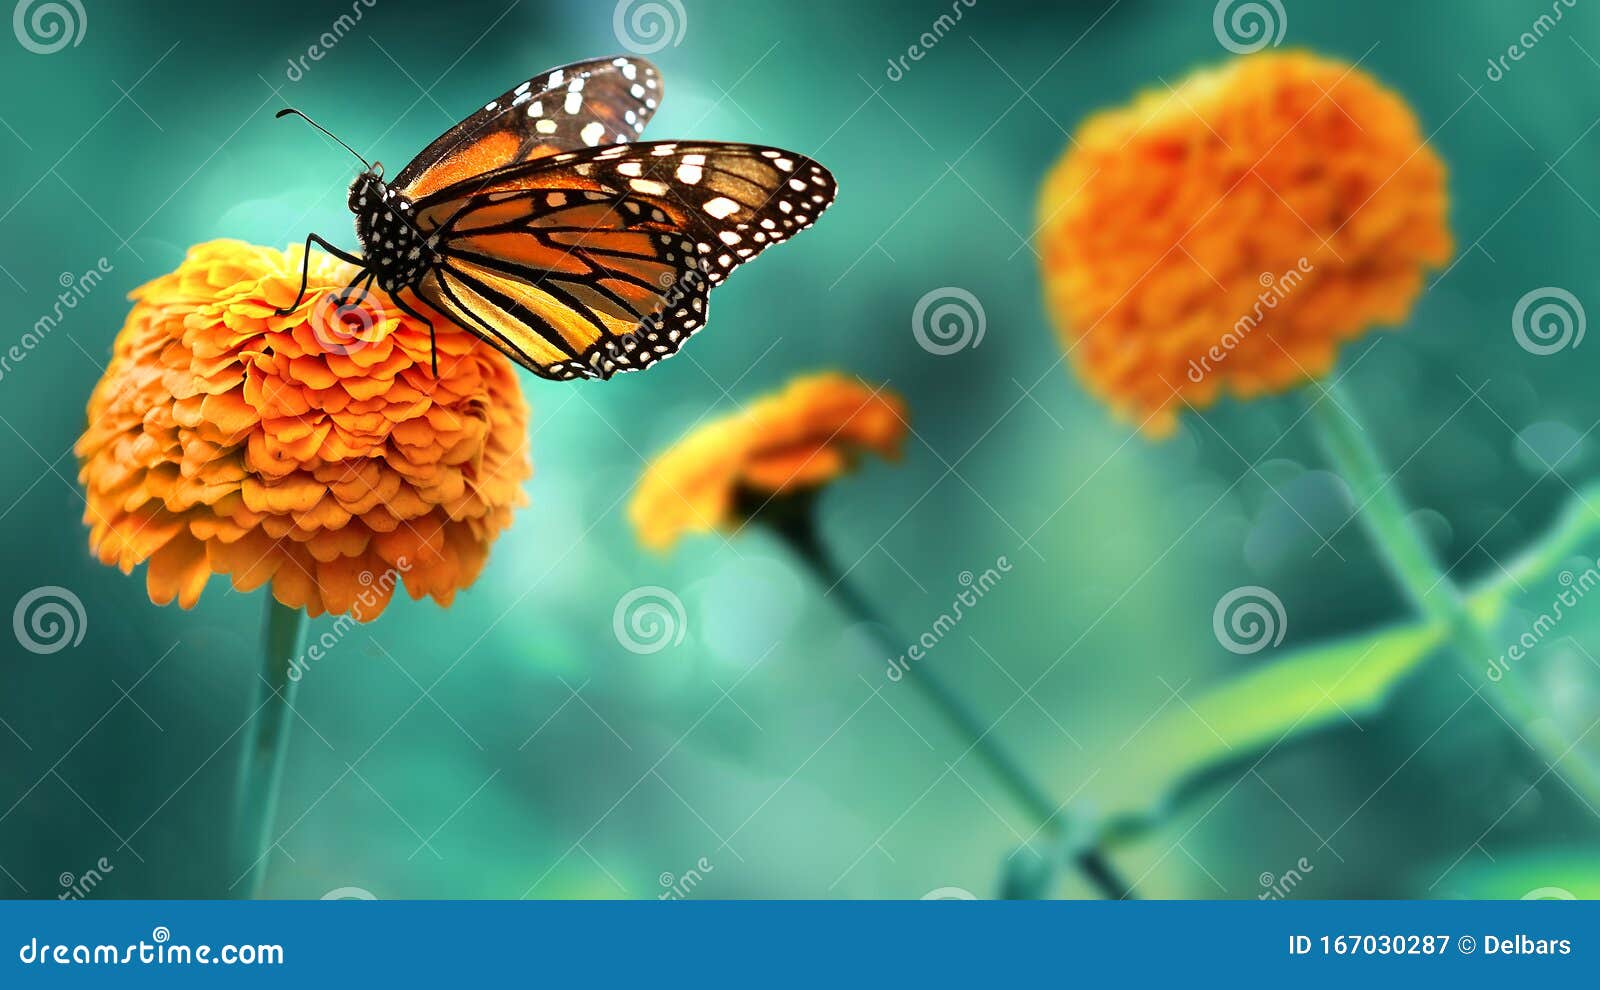 monarch orange butterfly and  bright summer flowers on a background of blue foliage in a fairy garden. macro artistic image.